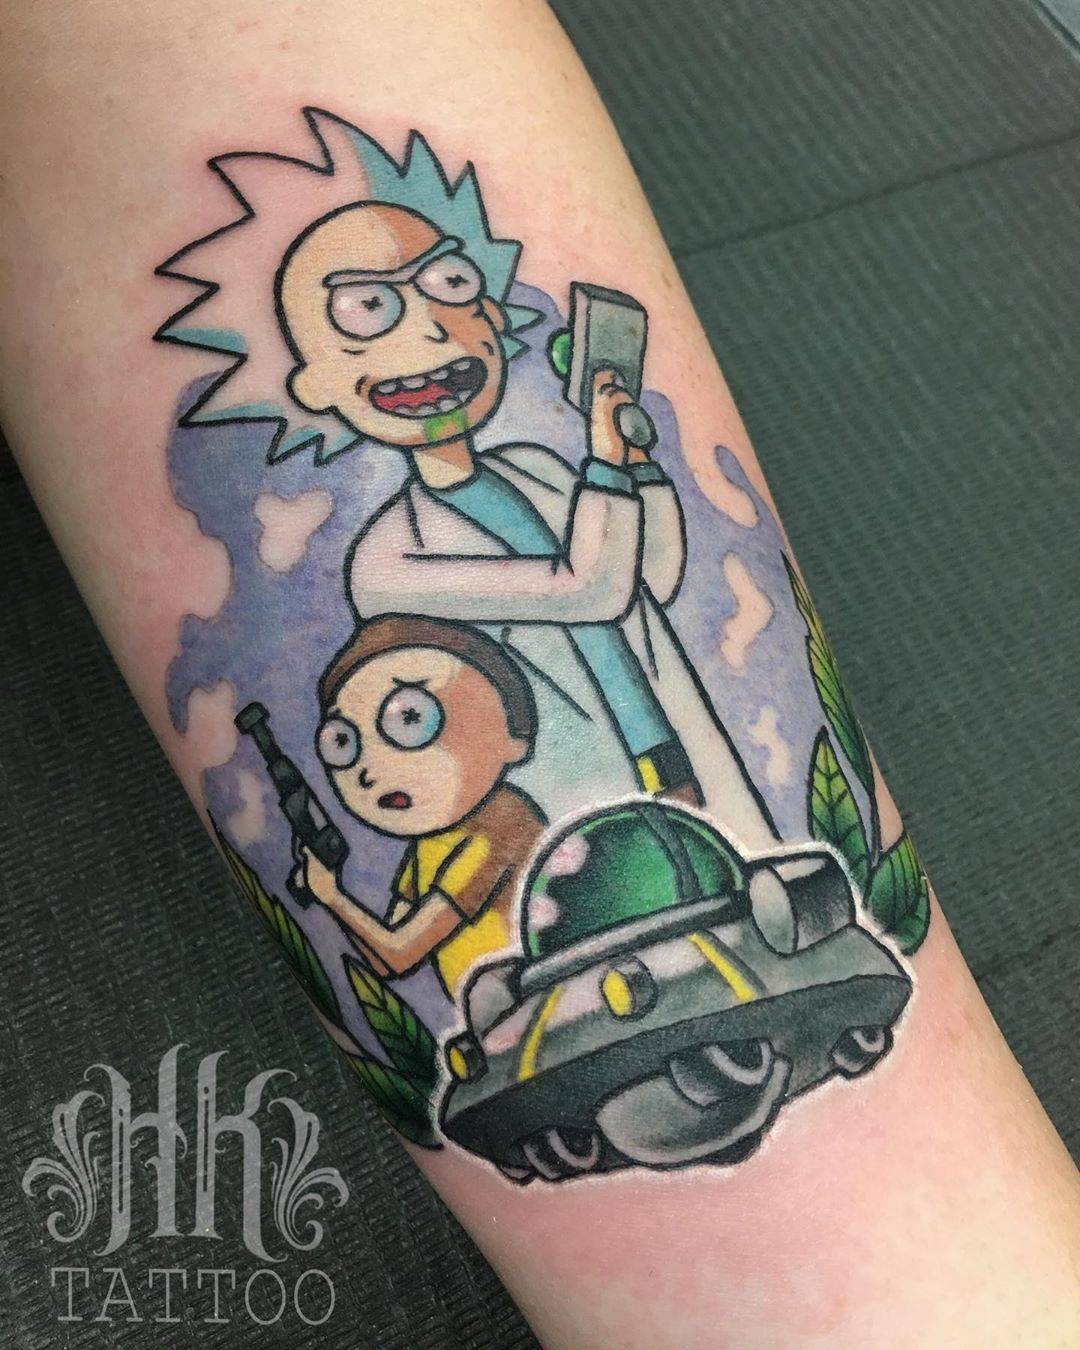 Rick and Morty tattoo.